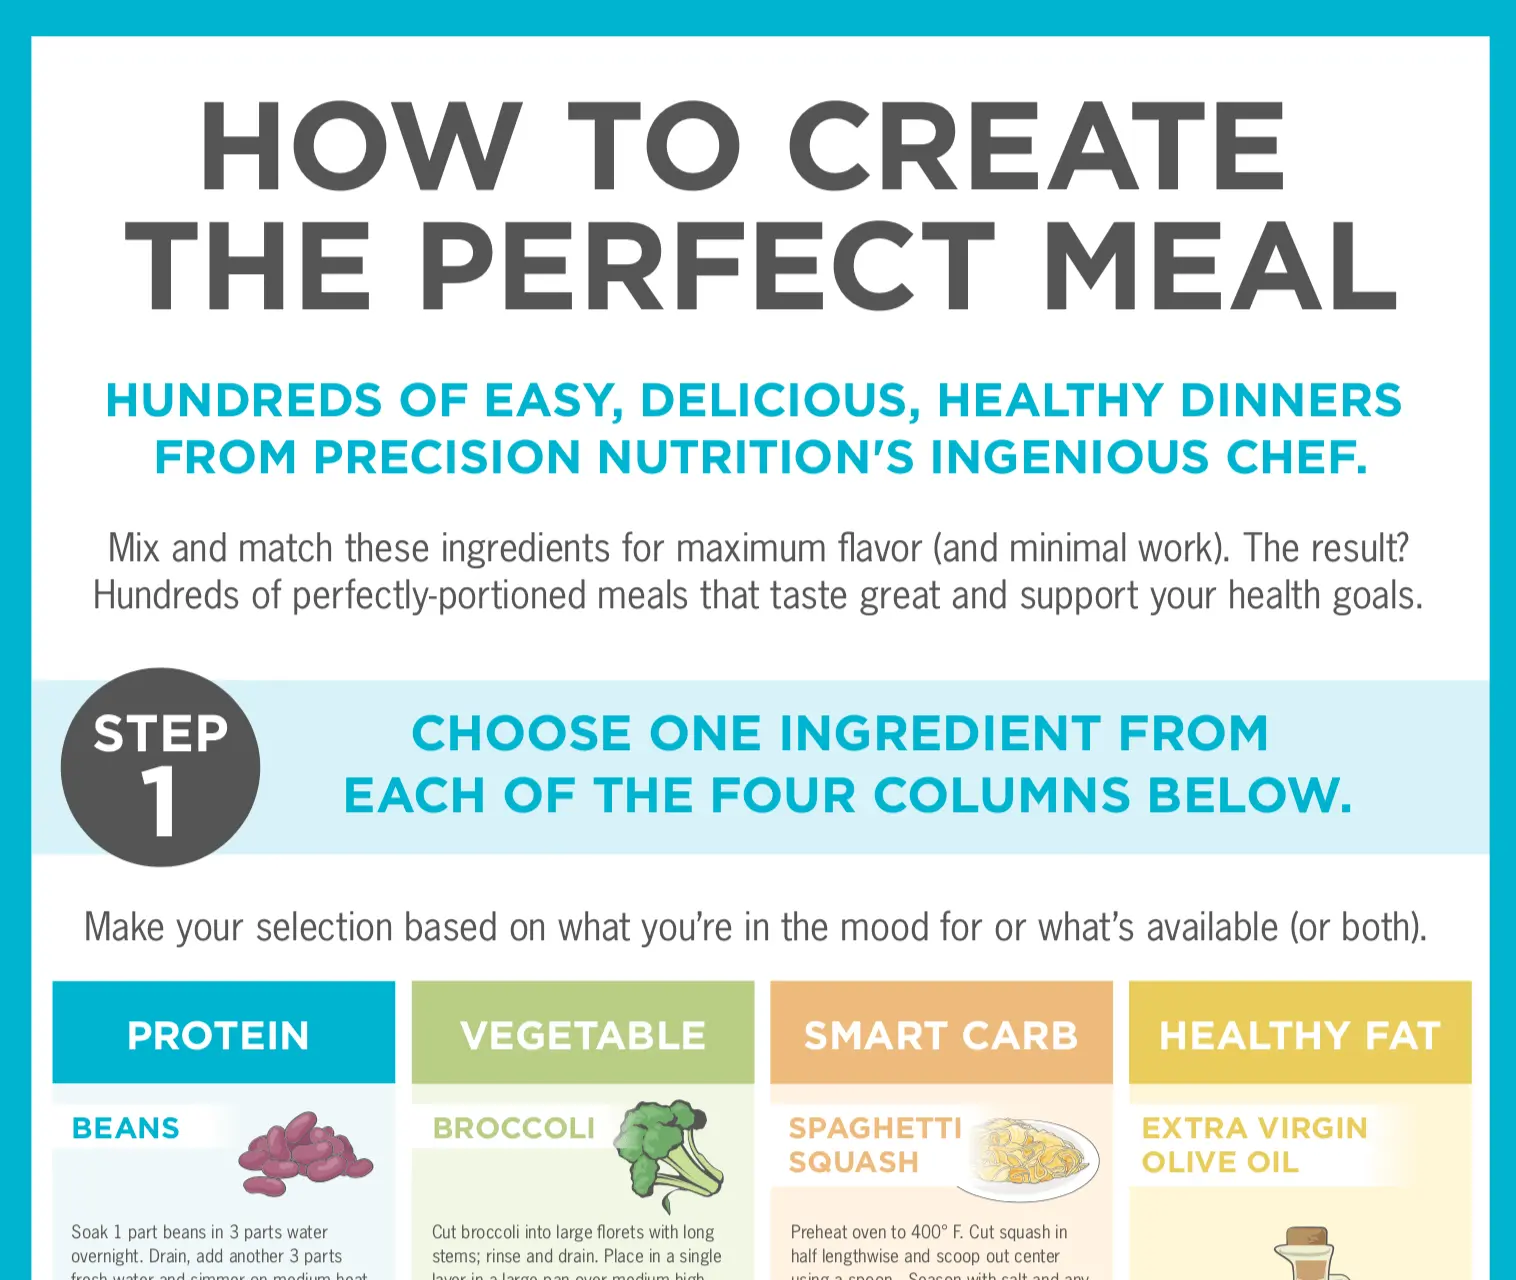 How to create a perfect meal guide